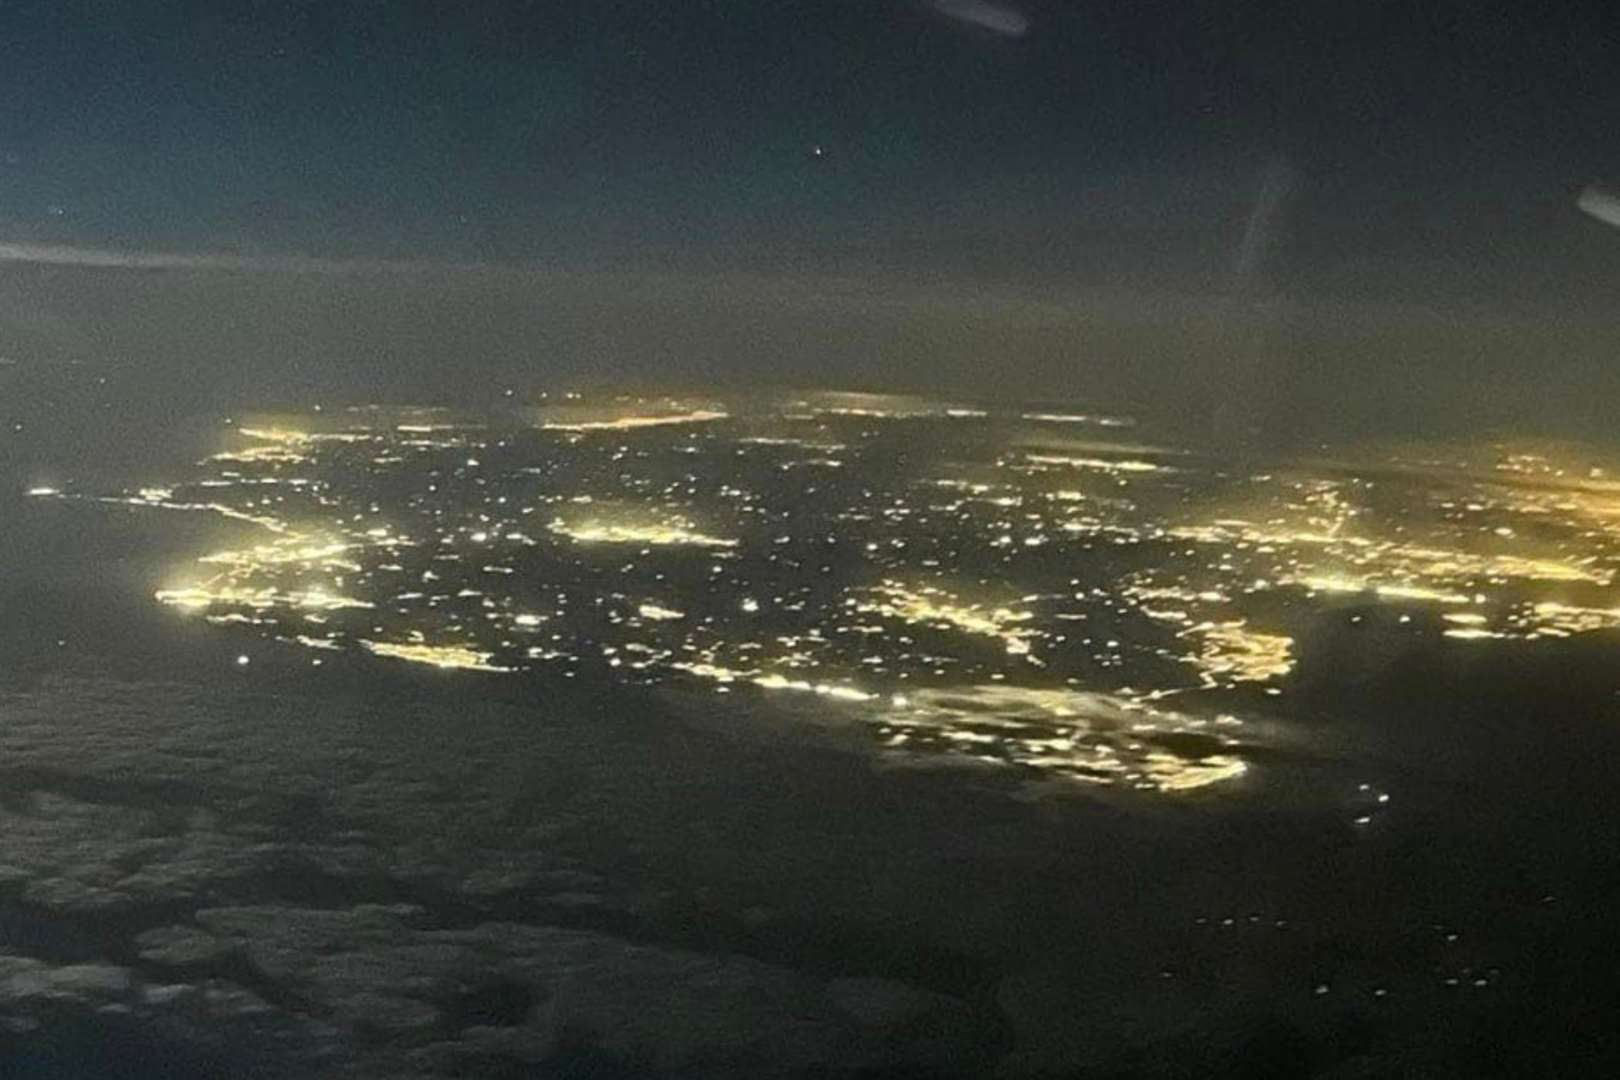 The Kent coastline as seen from the sky at night